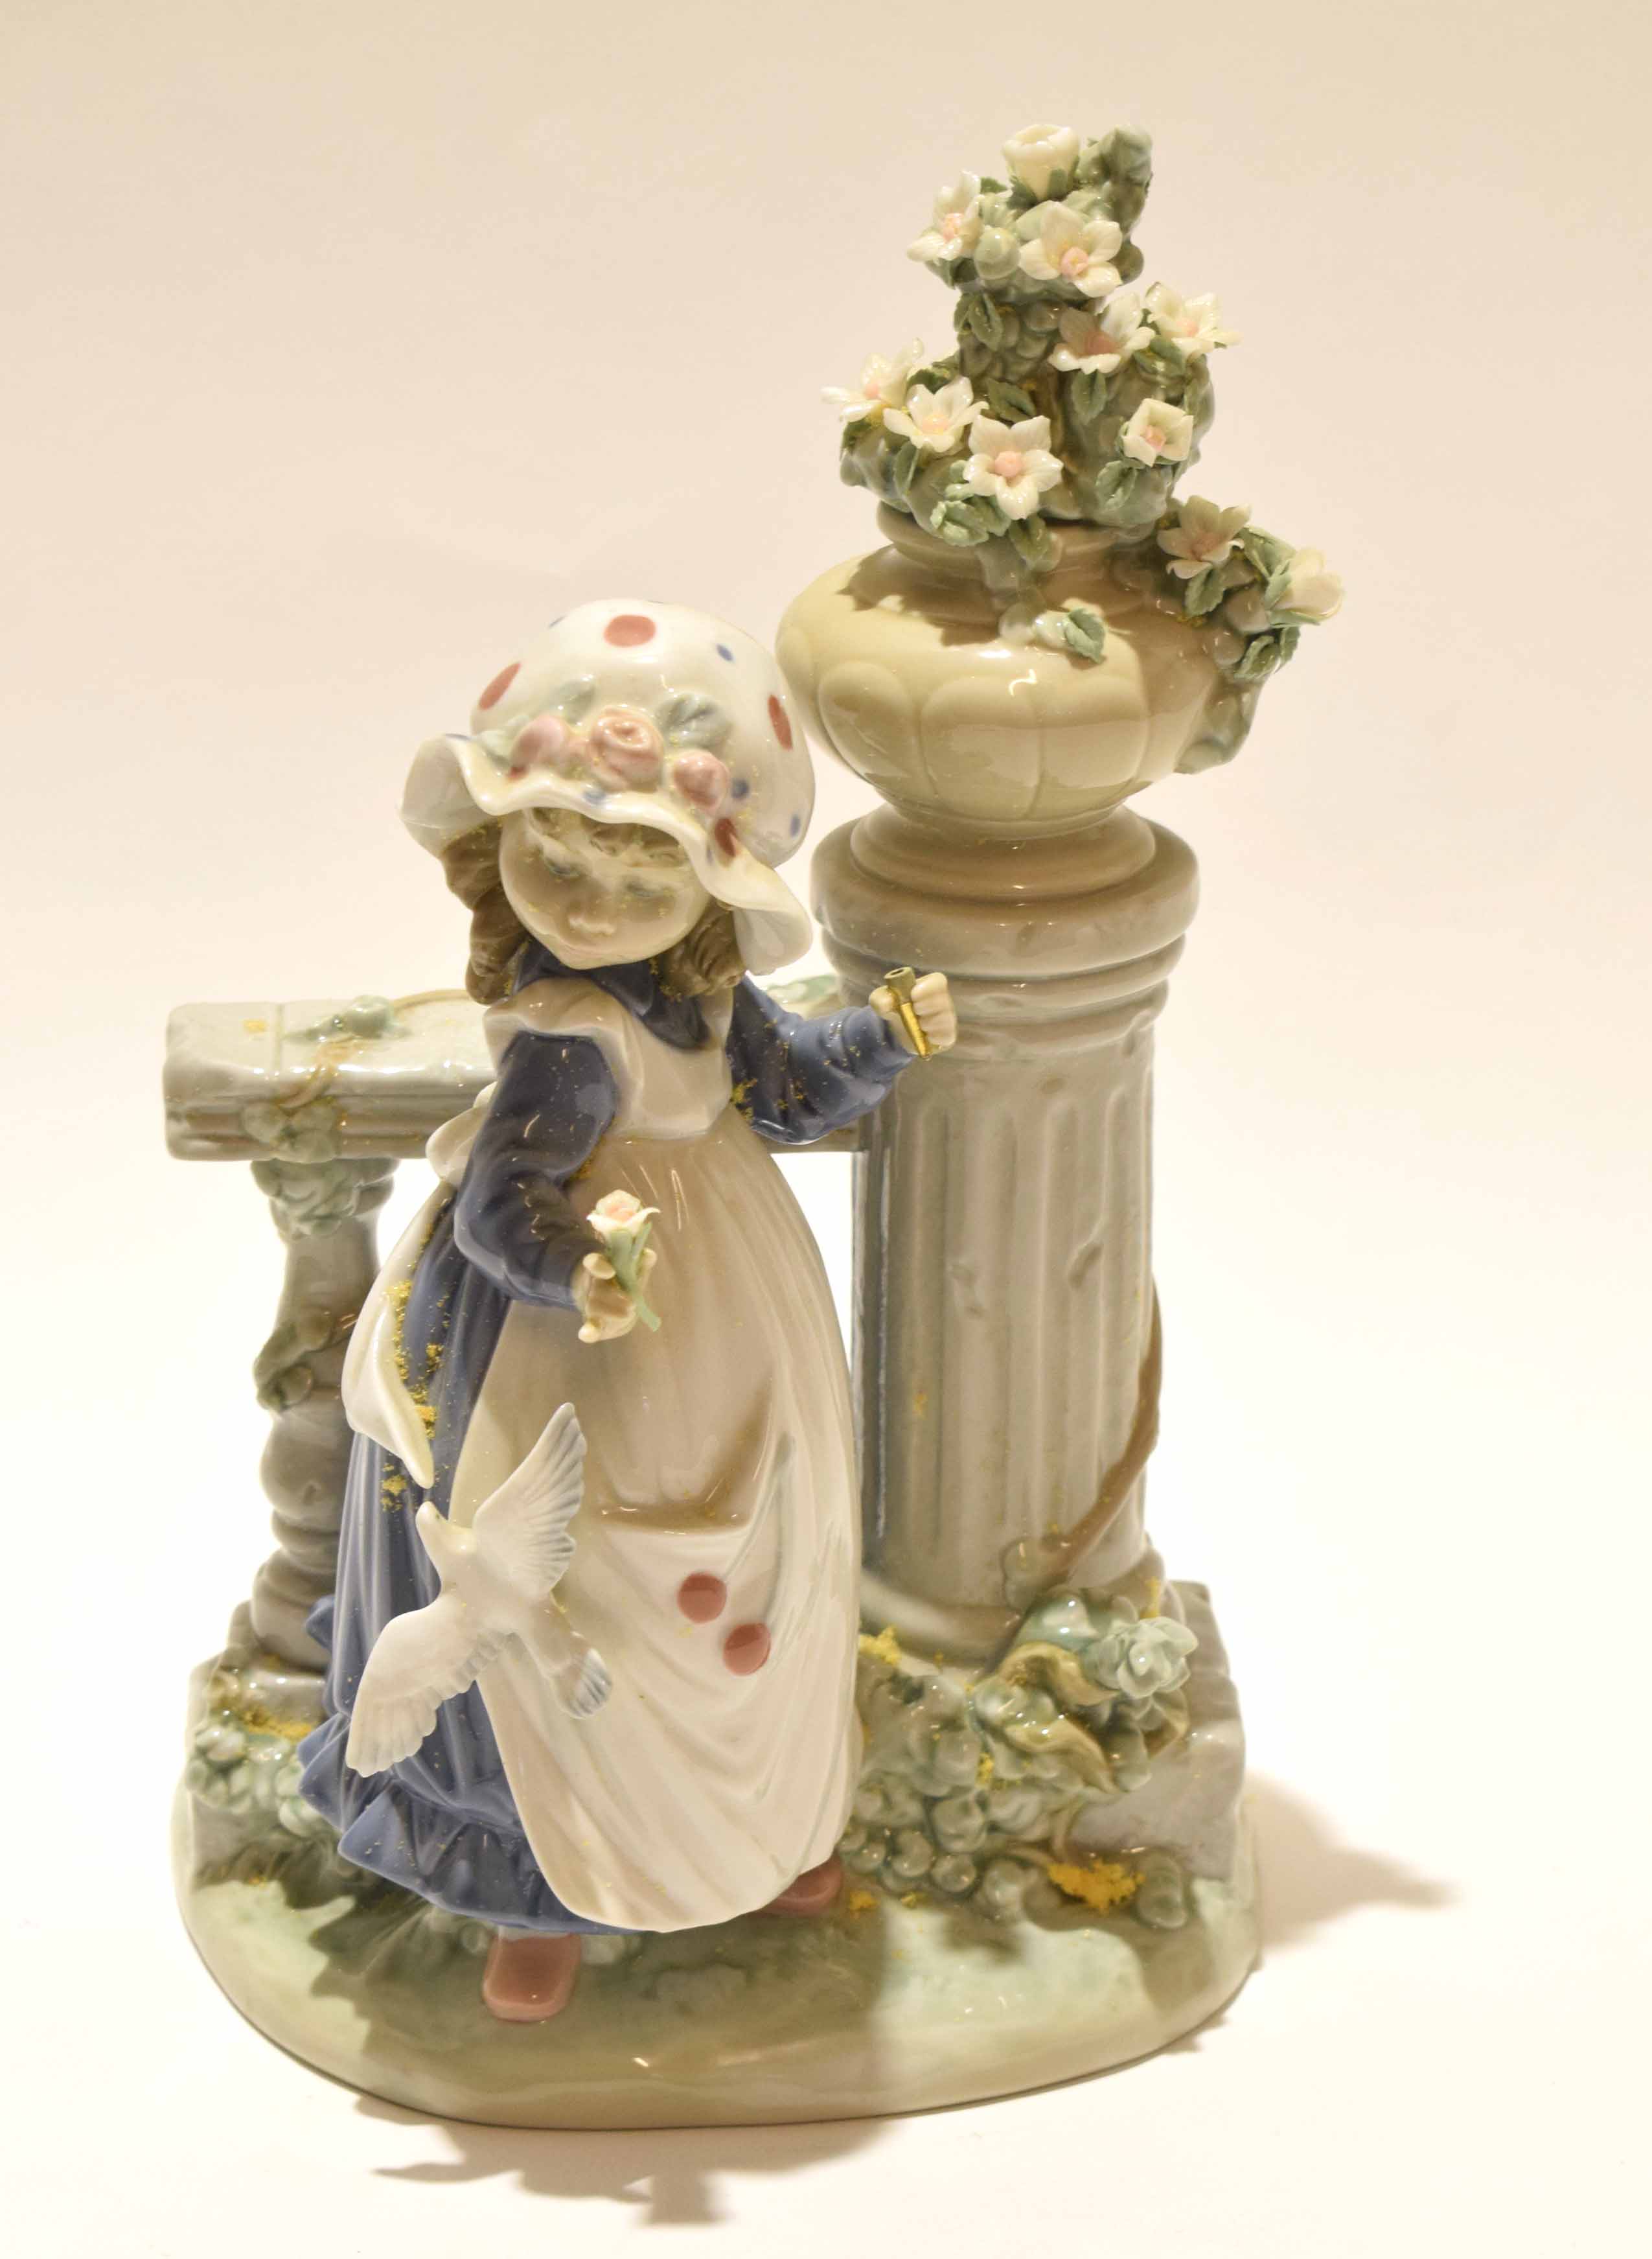 Lladro figure of a young girl alongside a classical column with floral spray, 30cm high